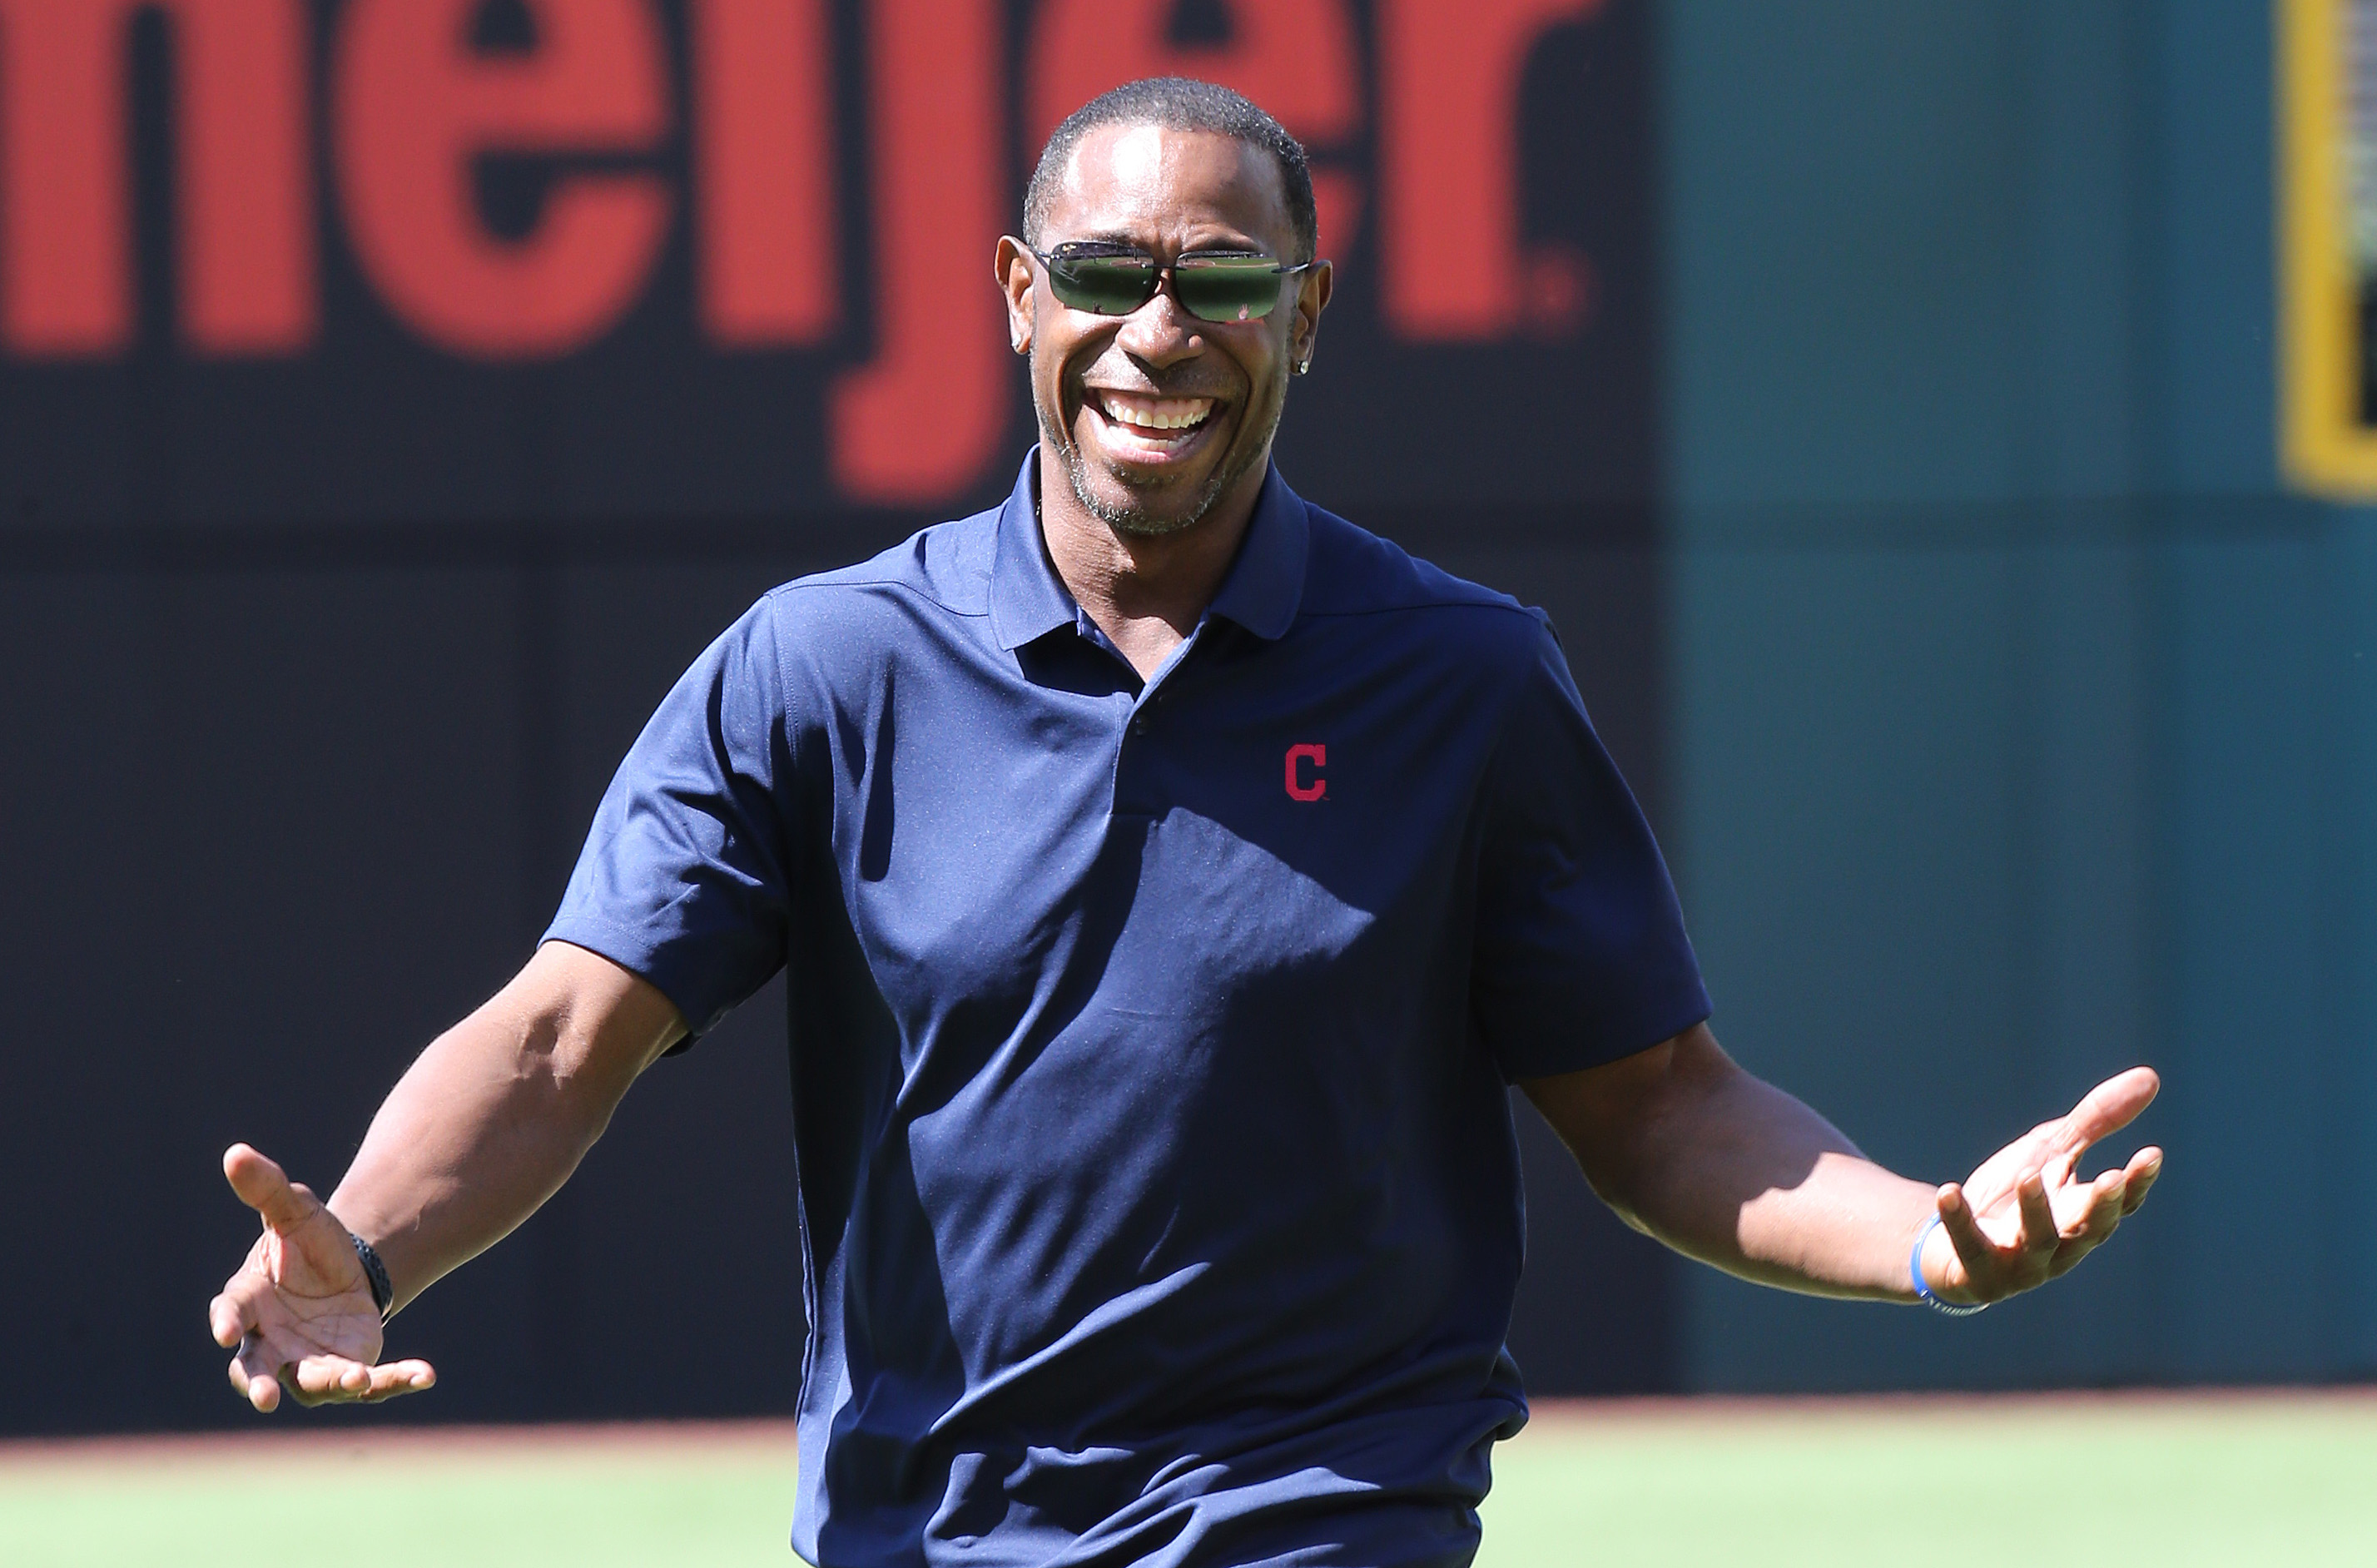 Cleveland great Kenny Lofton belongs in the Hall of Fame